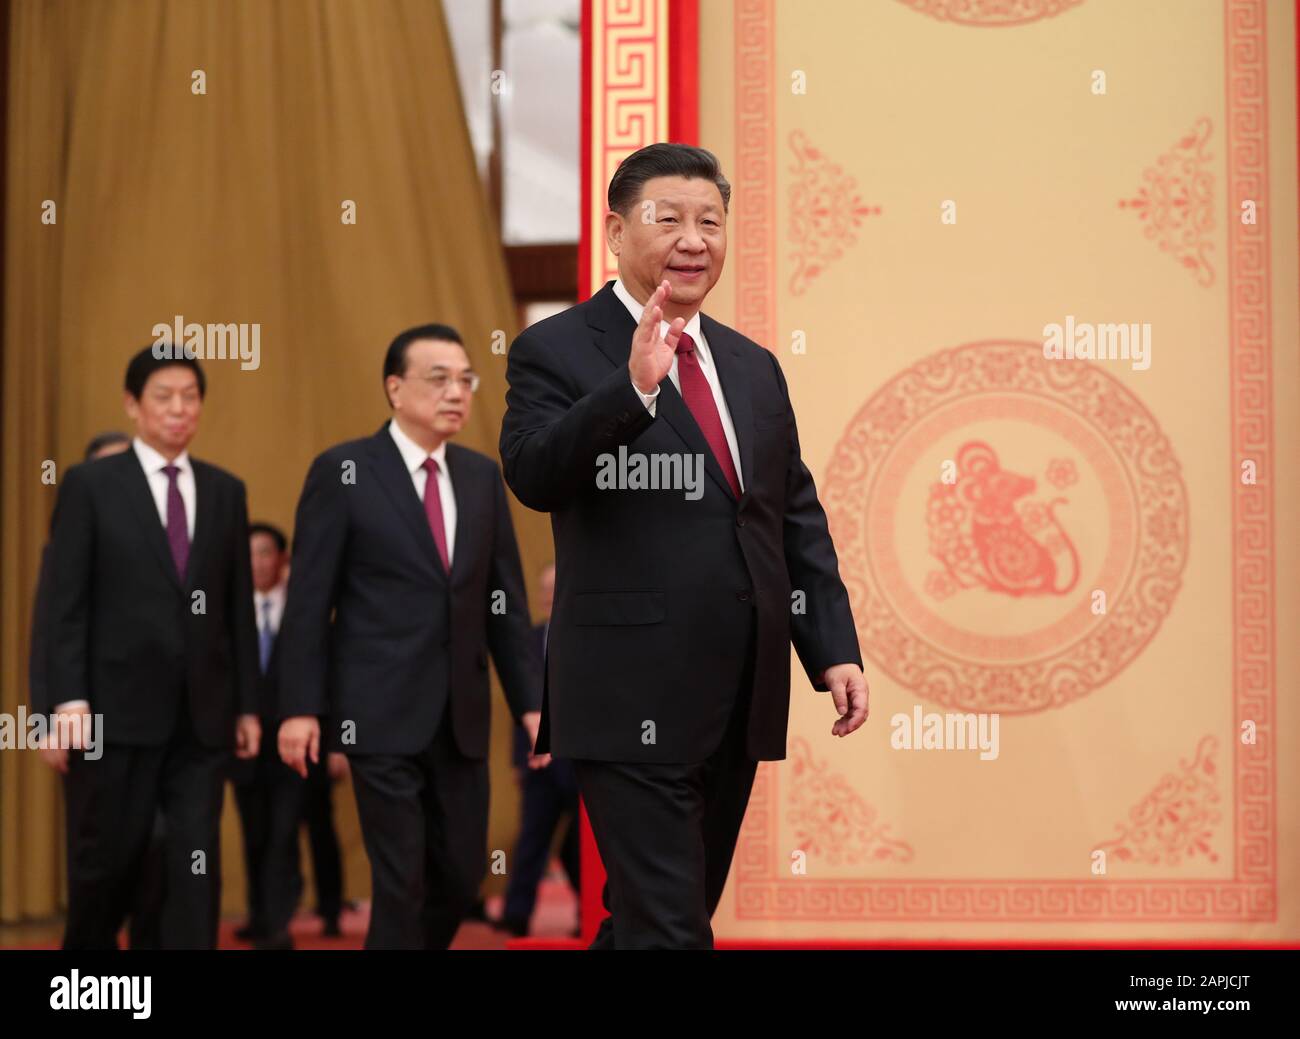 Beijing, China. 23rd Jan, 2020. Party and state leaders Xi Jinping, Li Keqiang, Li Zhanshu, Wang Yang, Wang Huning, Zhao Leji, Han Zheng and Wang Qishan attend a Chinese Lunar New Year reception at the Great Hall of the People in Beijing, capital of China, Jan. 23, 2020. The Communist Party of China (CPC) Central Committee and the State Council held the reception on Thursday in Beijing. Credit: Ding Lin/Xinhua/Alamy Live News Stock Photo